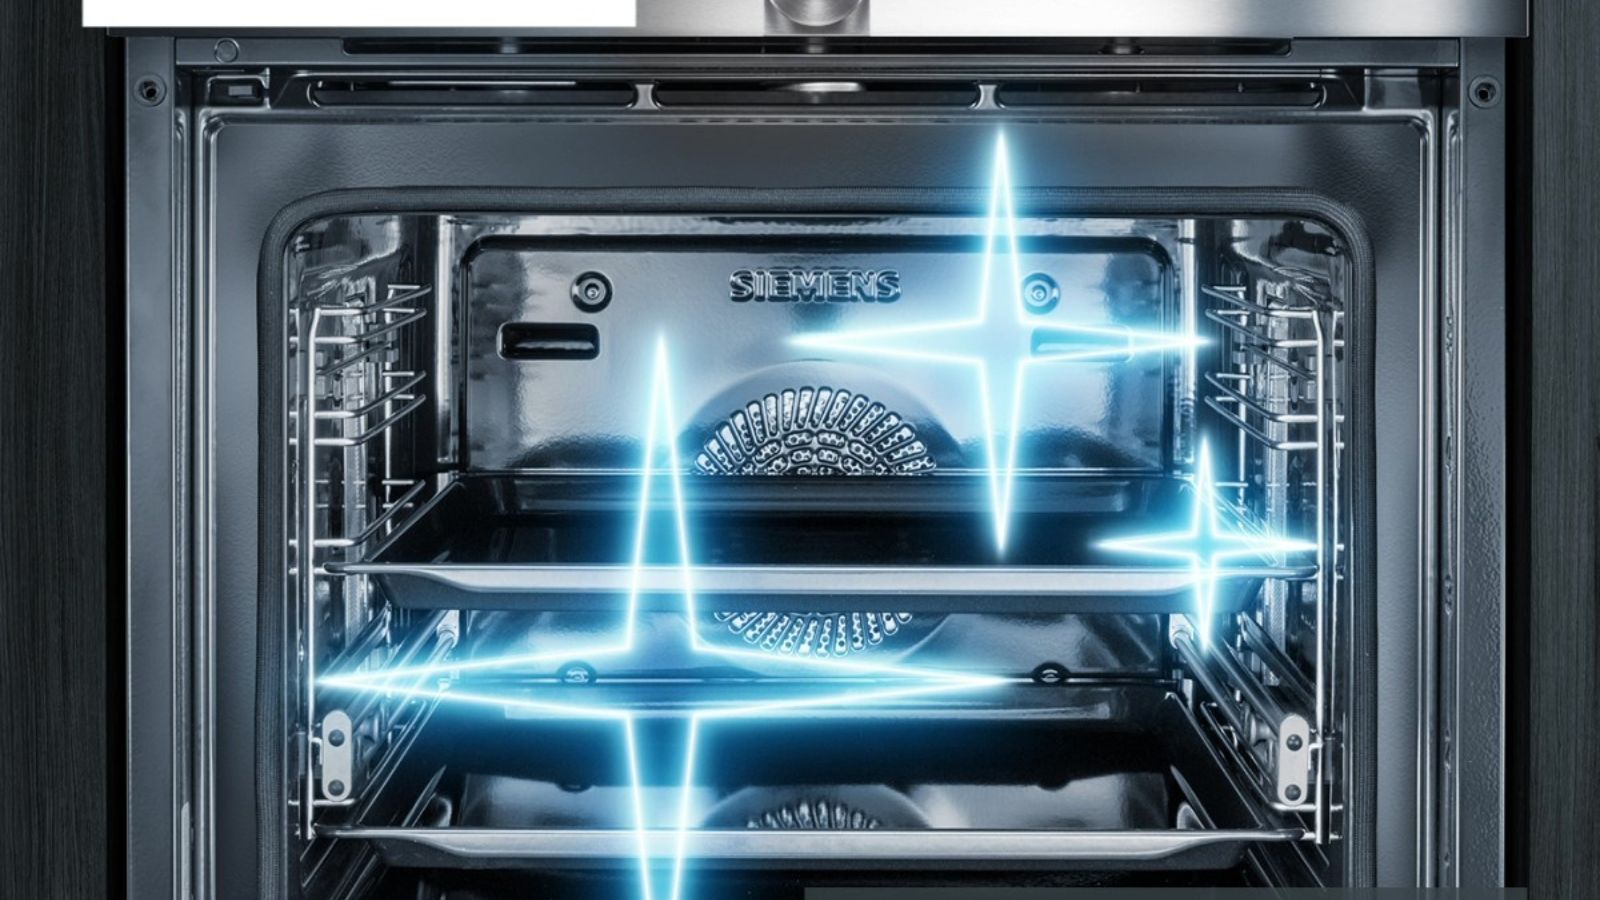 Siemens self-cleaning ovens